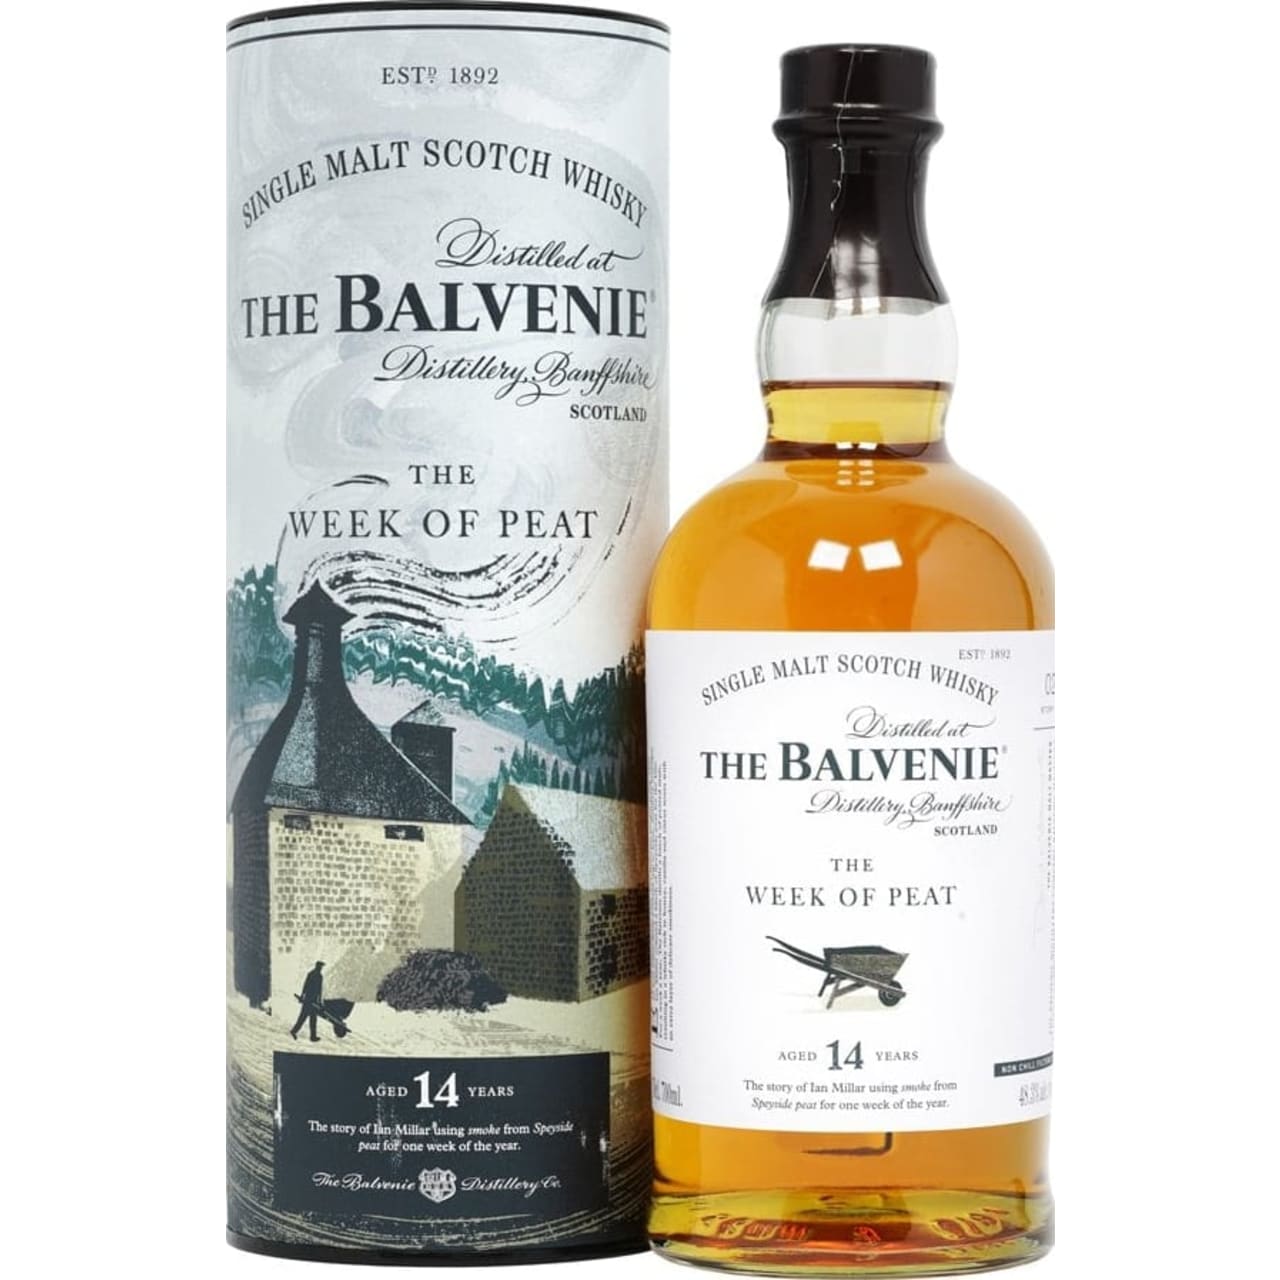 Product Image - The Balvenie The Week of Peat Whisky